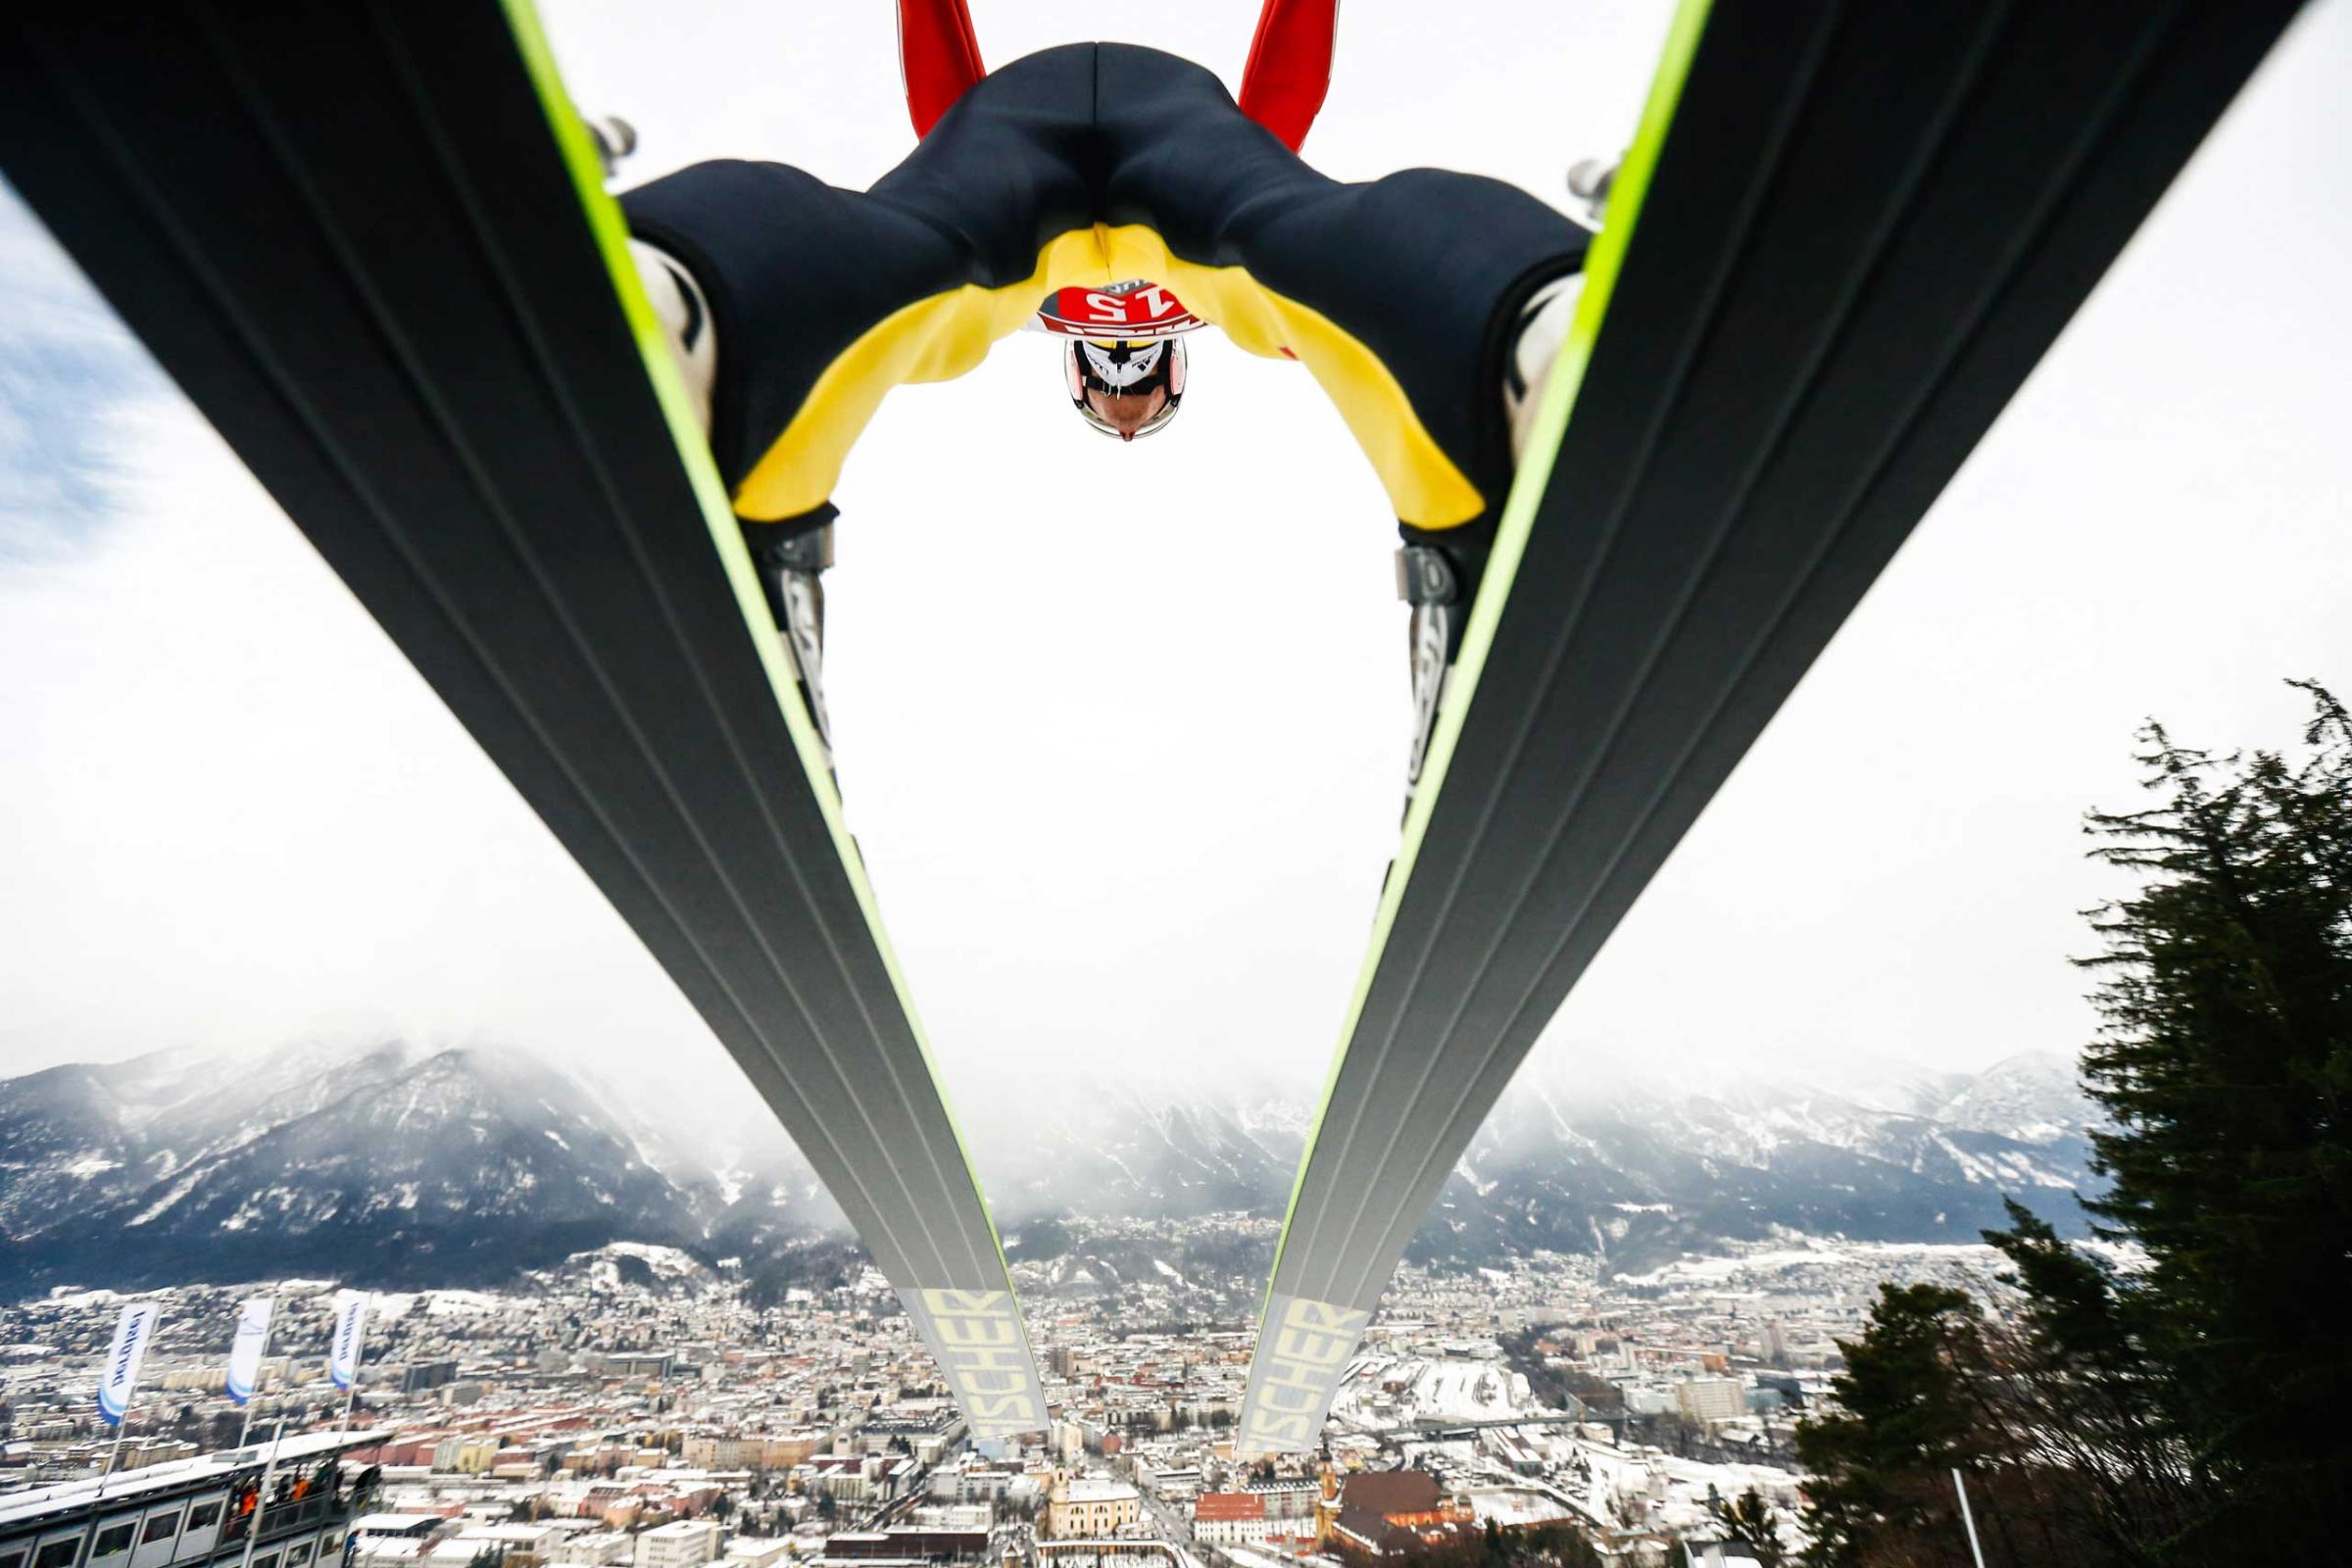 Jan. 4, 2015. Severin Freund of Germany during the FIS Ski Jumping World Cup in Innsbruck, Austria.